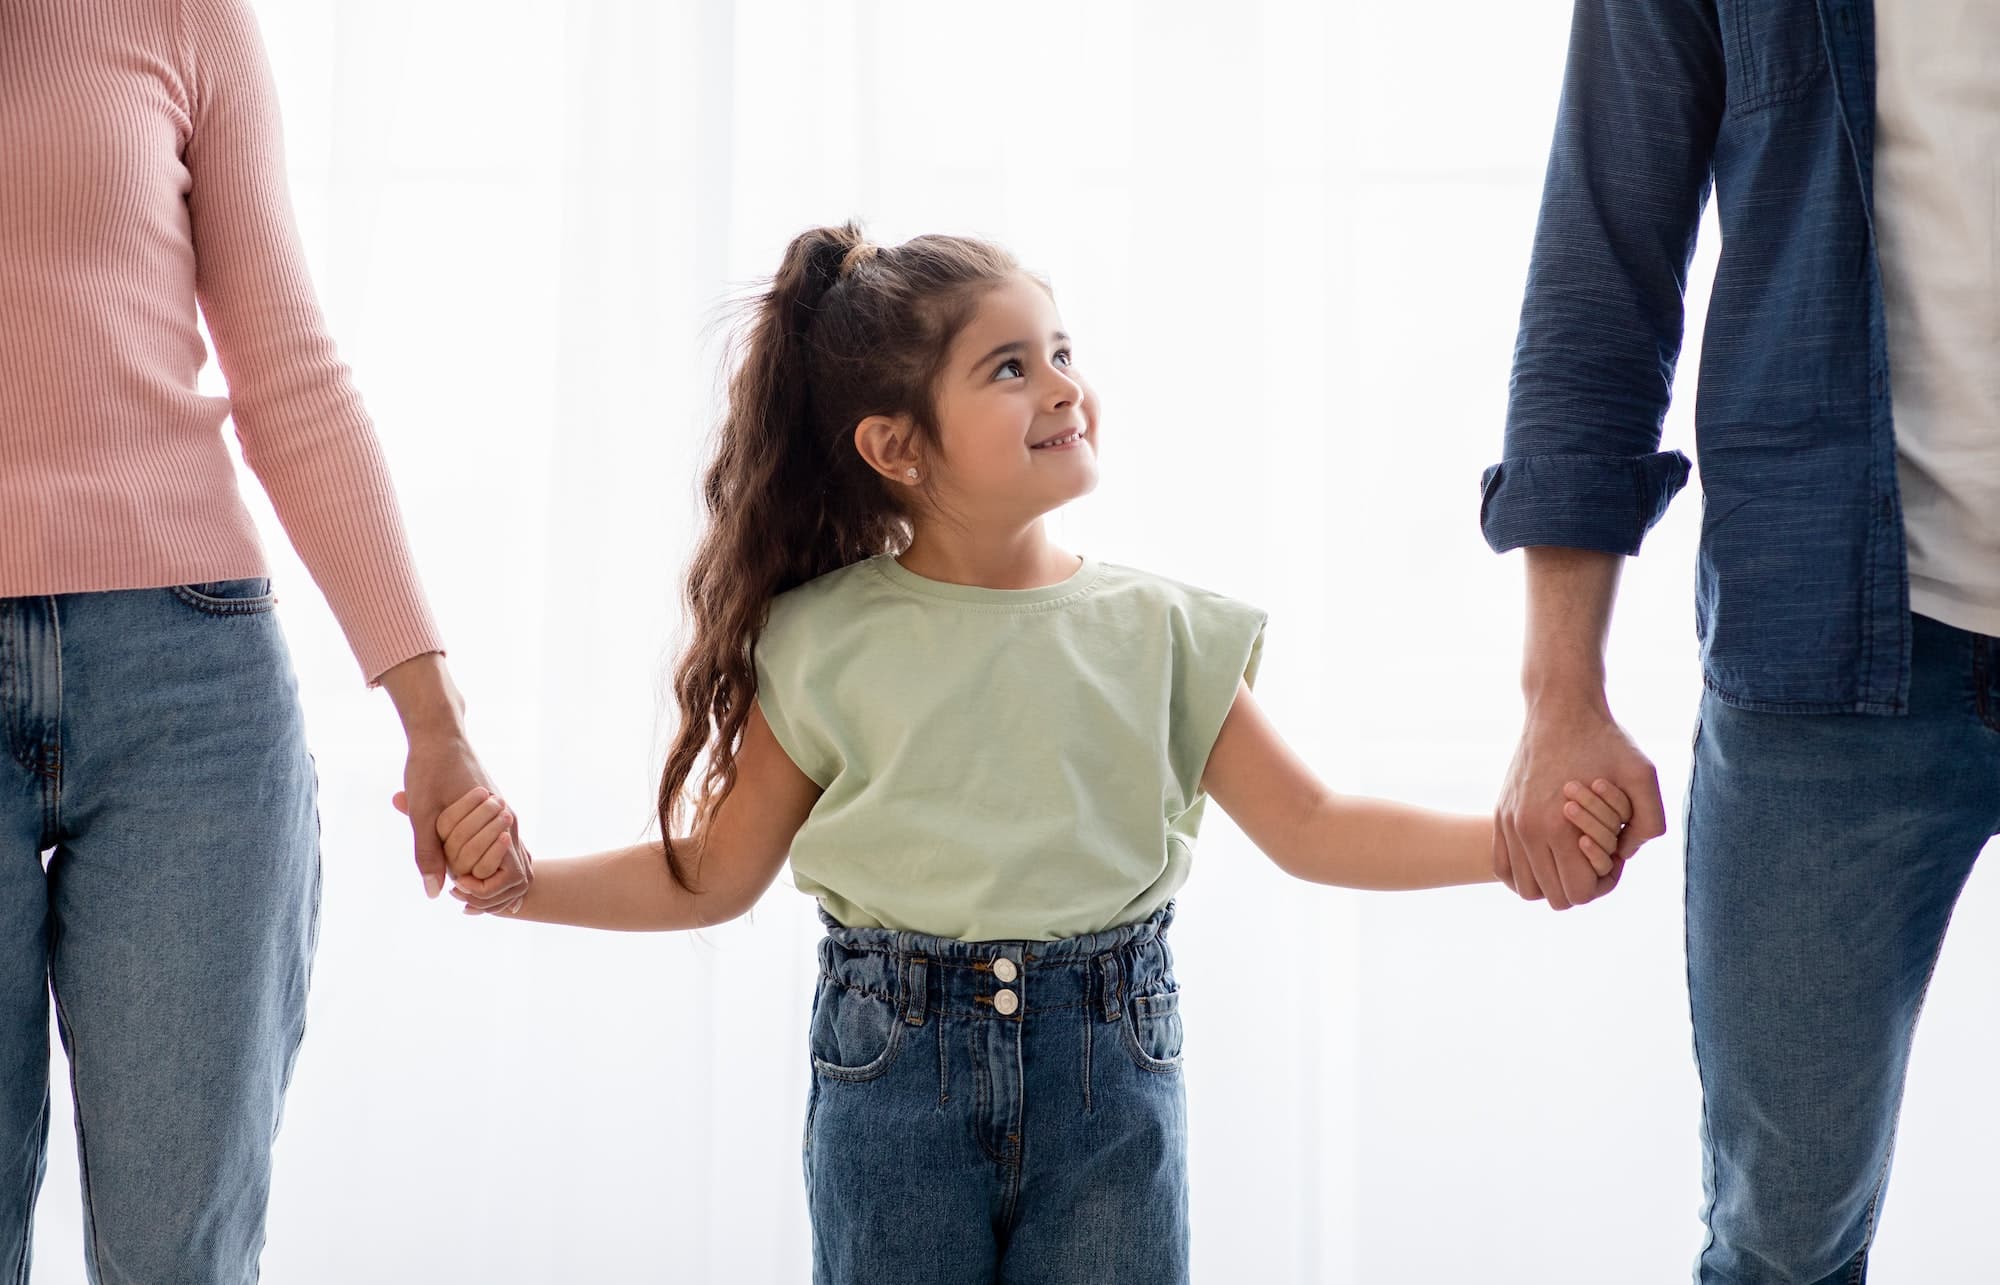 Adoption Concept. Adorable Little Girl Holding Hands With Unrecognizable Mom and&nbspDad